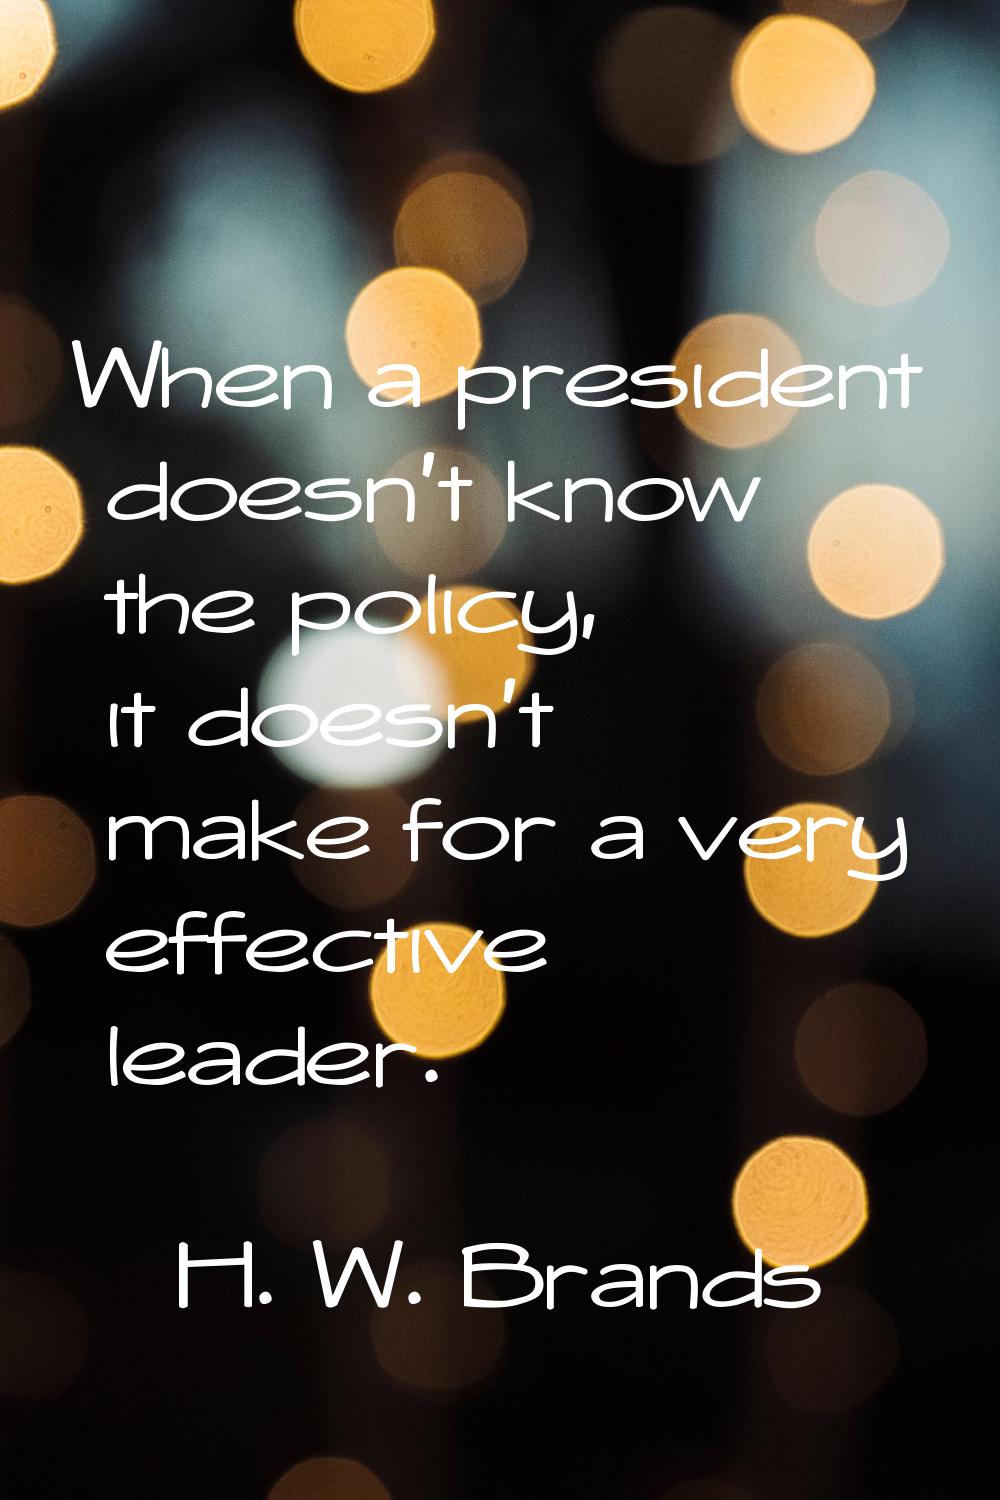 When a president doesn't know the policy, it doesn't make for a very effective leader.